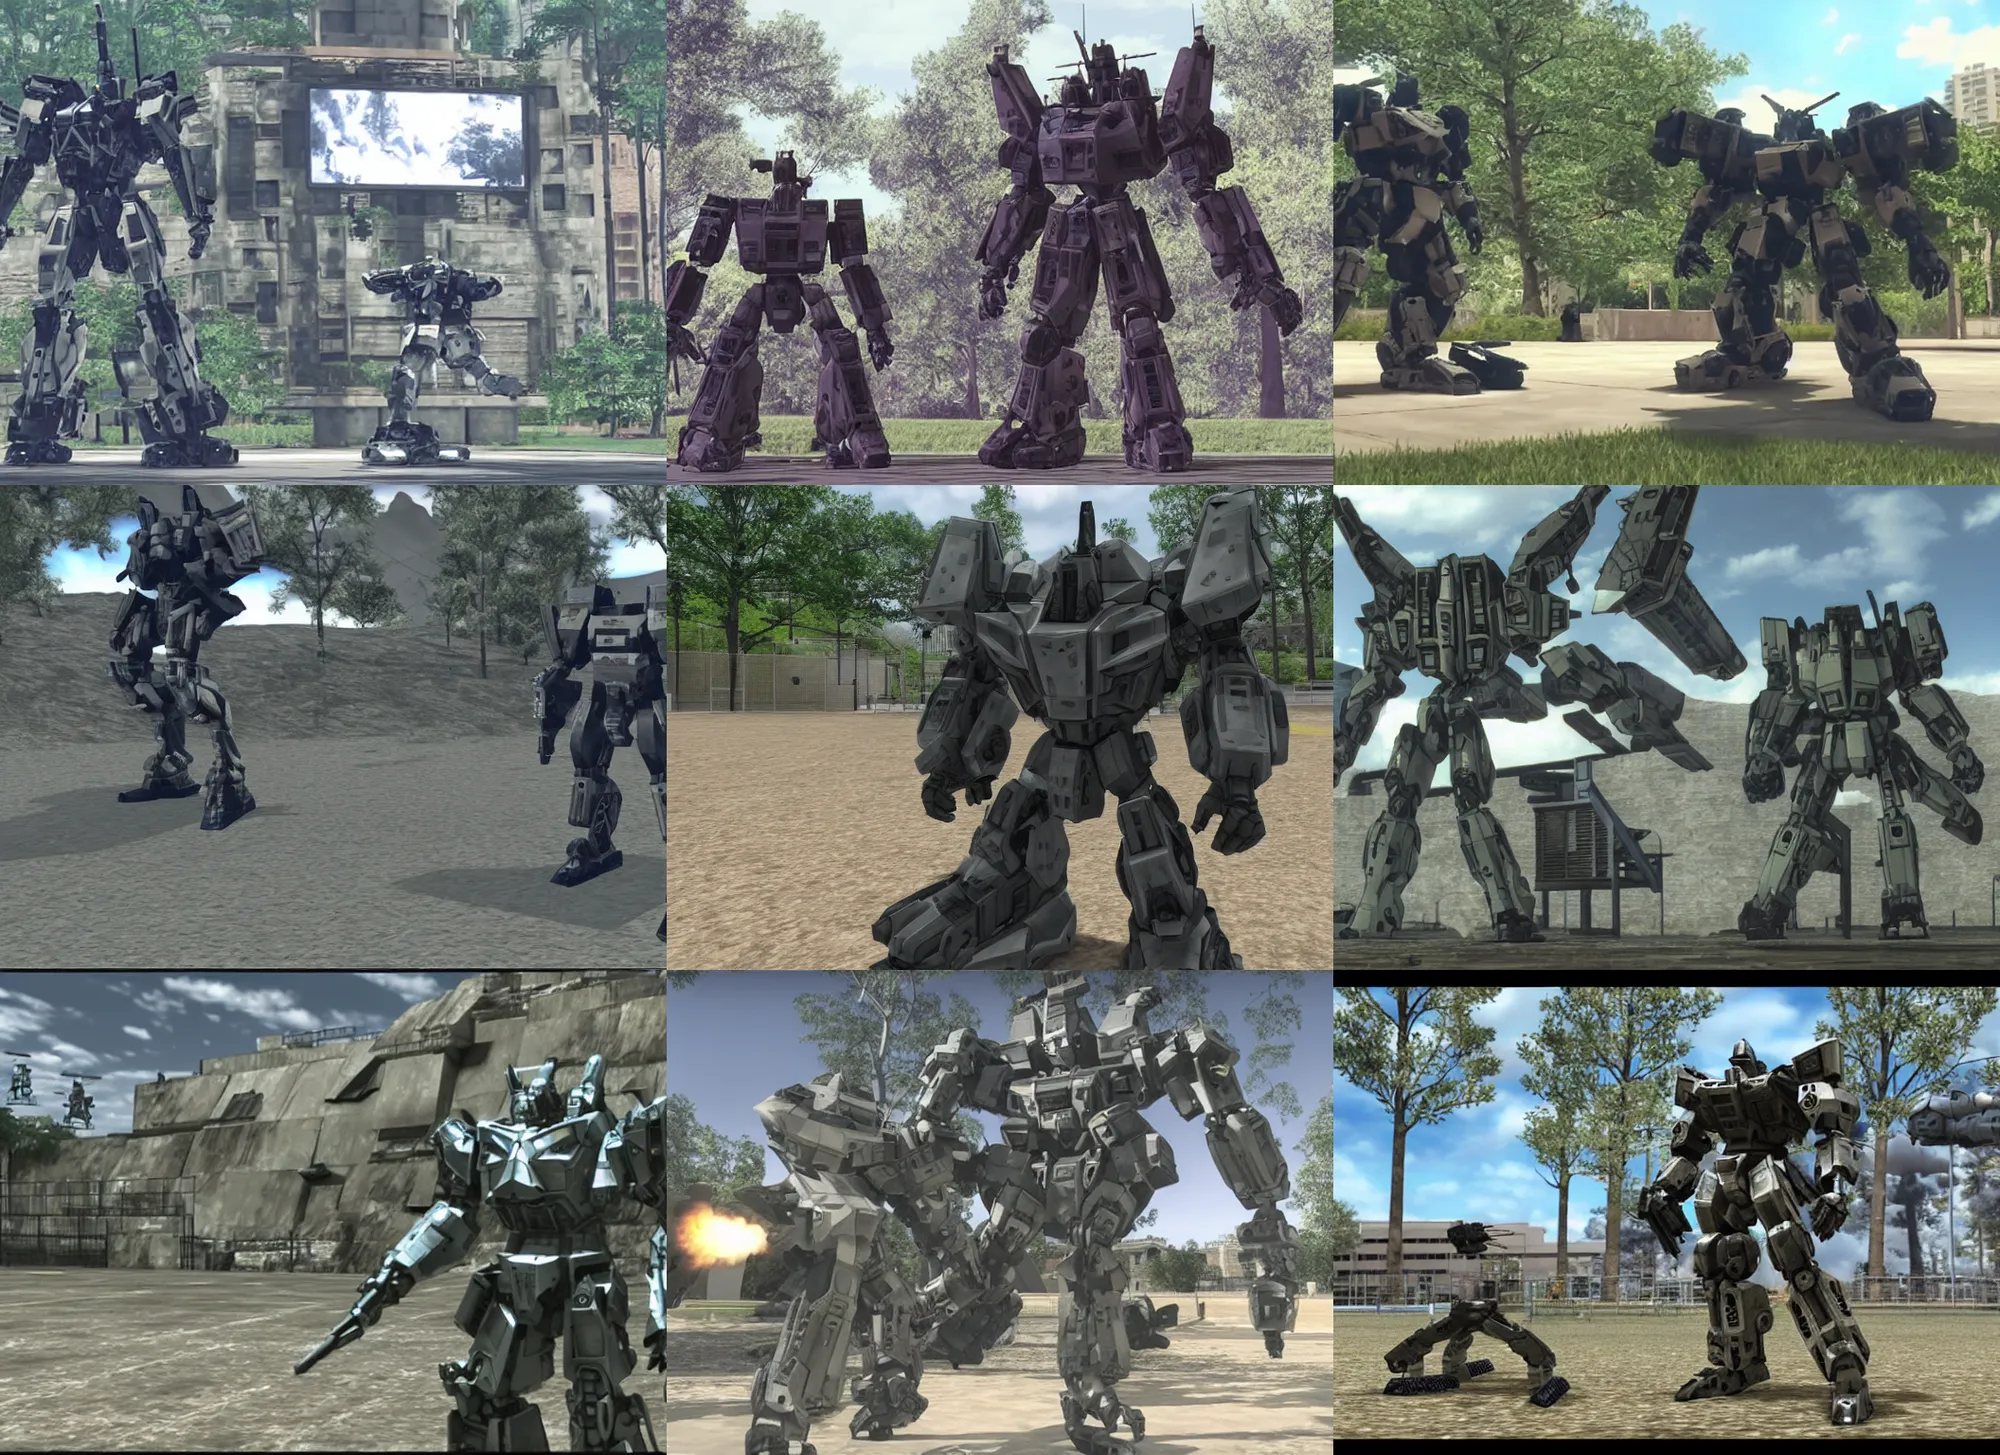 Prompt: color home video footage, an armored core playing in the playground